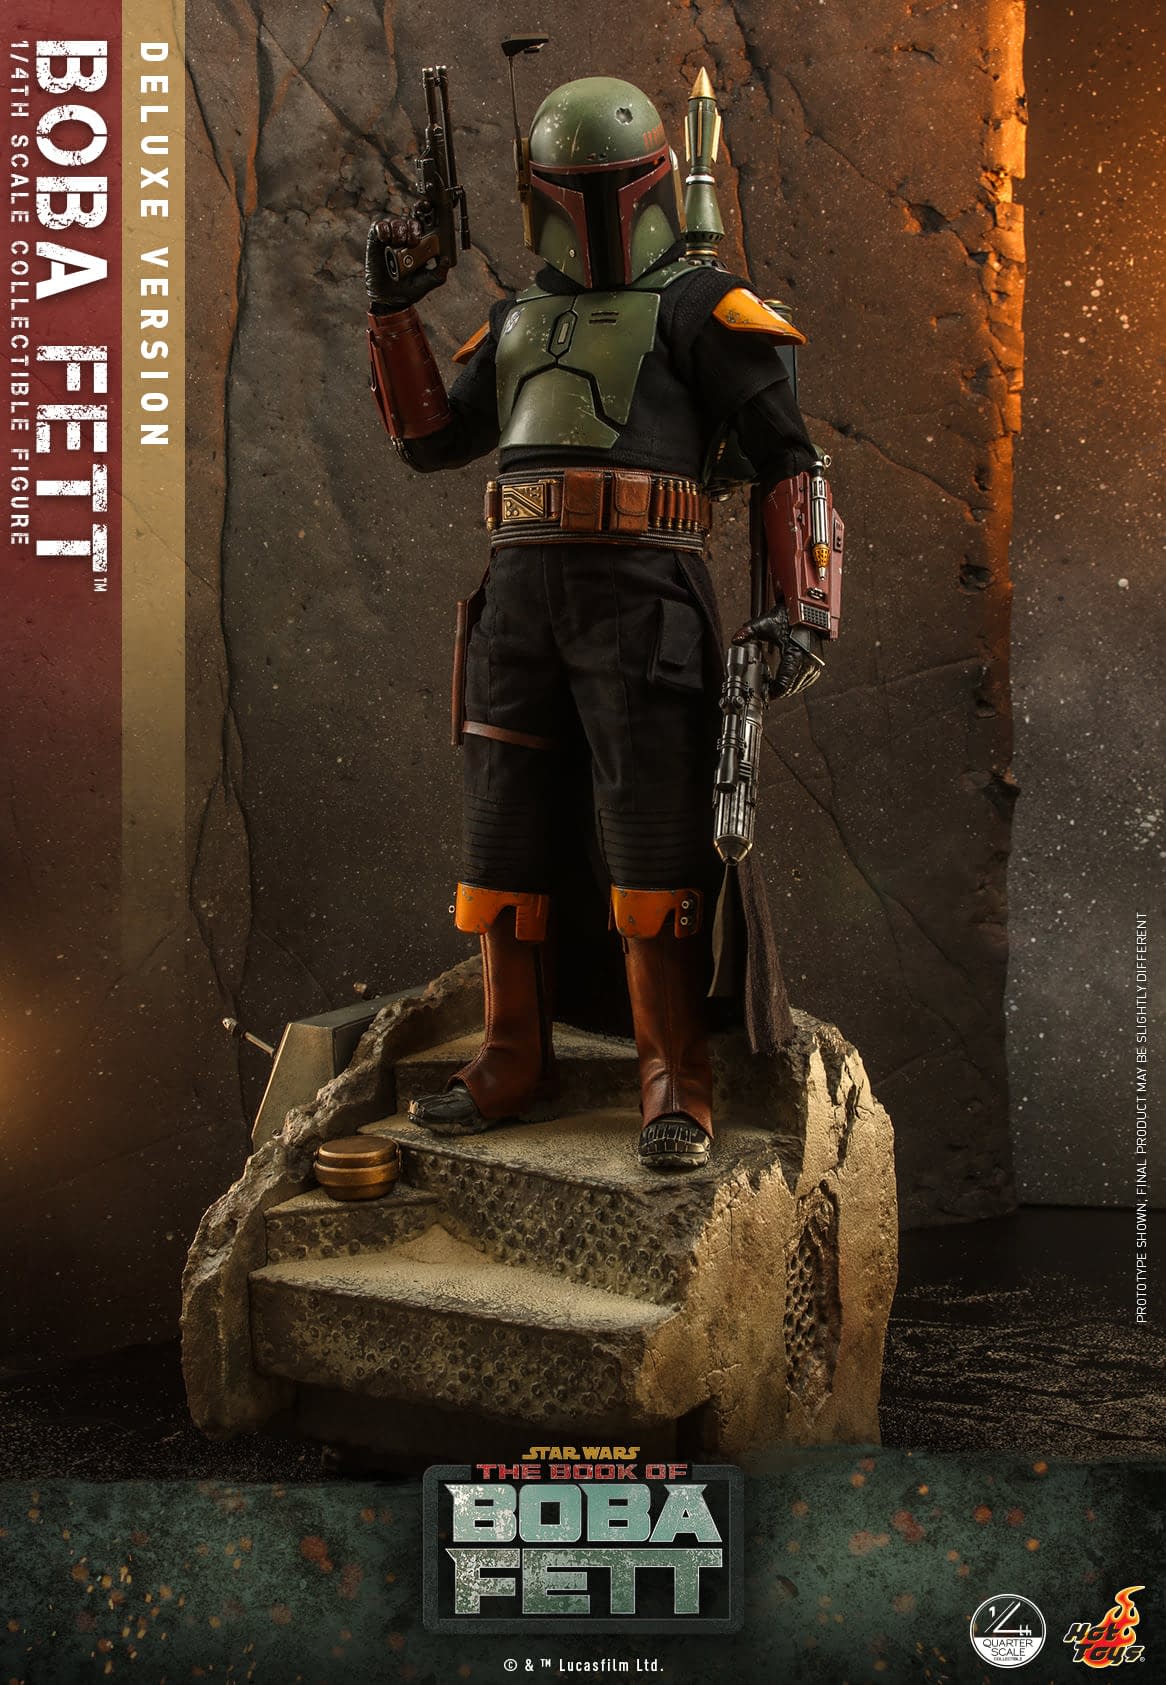 The Book of Boba Fett Comes to Hot Toys with 1/4 Star Wars Figure